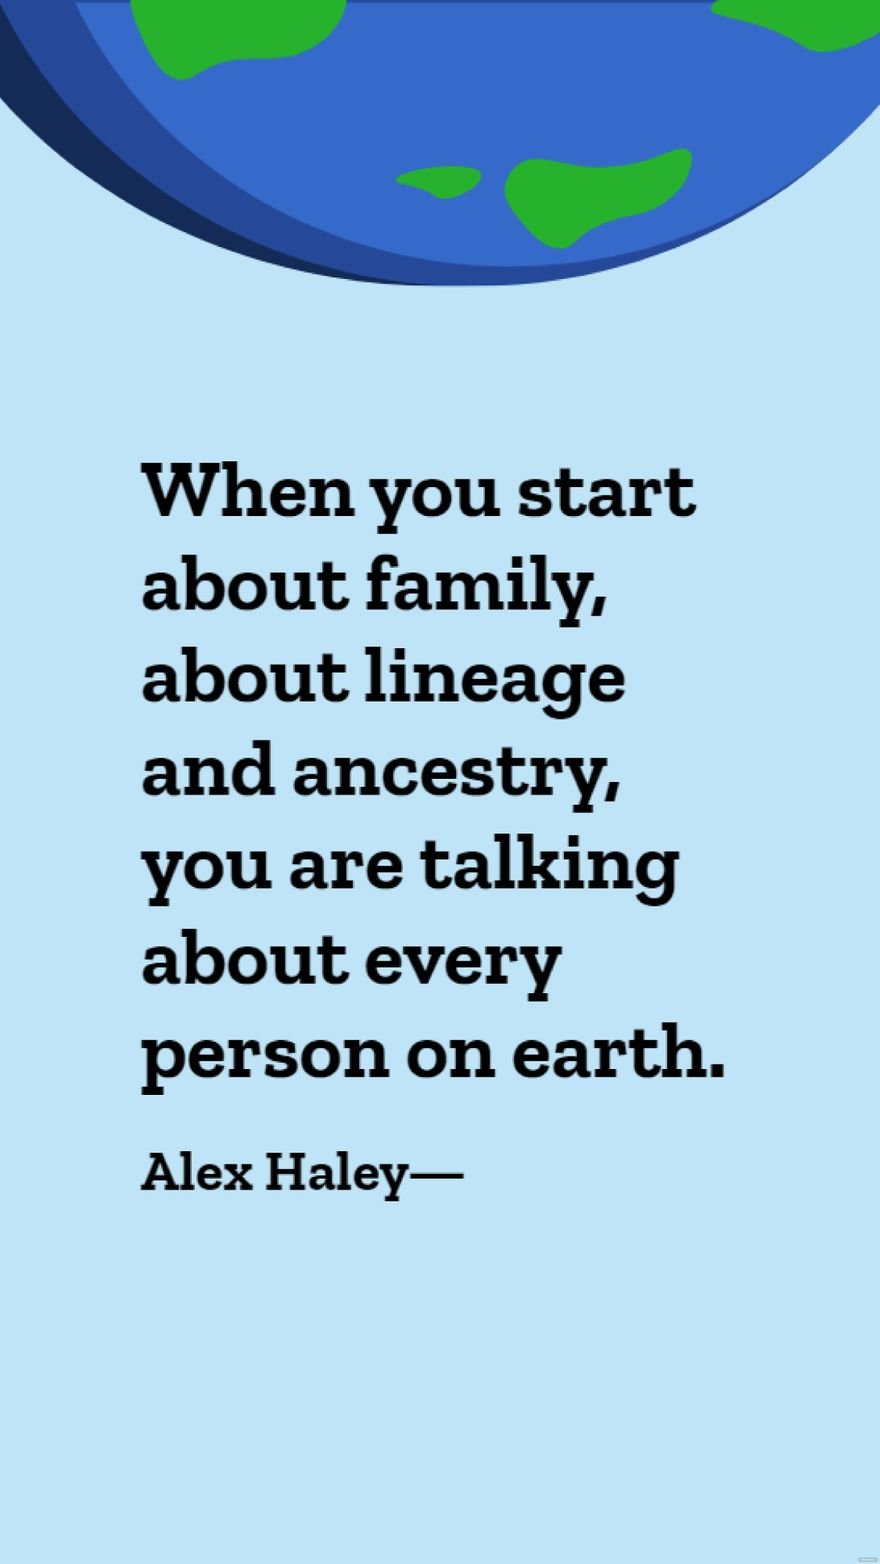 Free Alex Haley - When you start about family, about lineage and ancestry, you are talking about every person on earth.